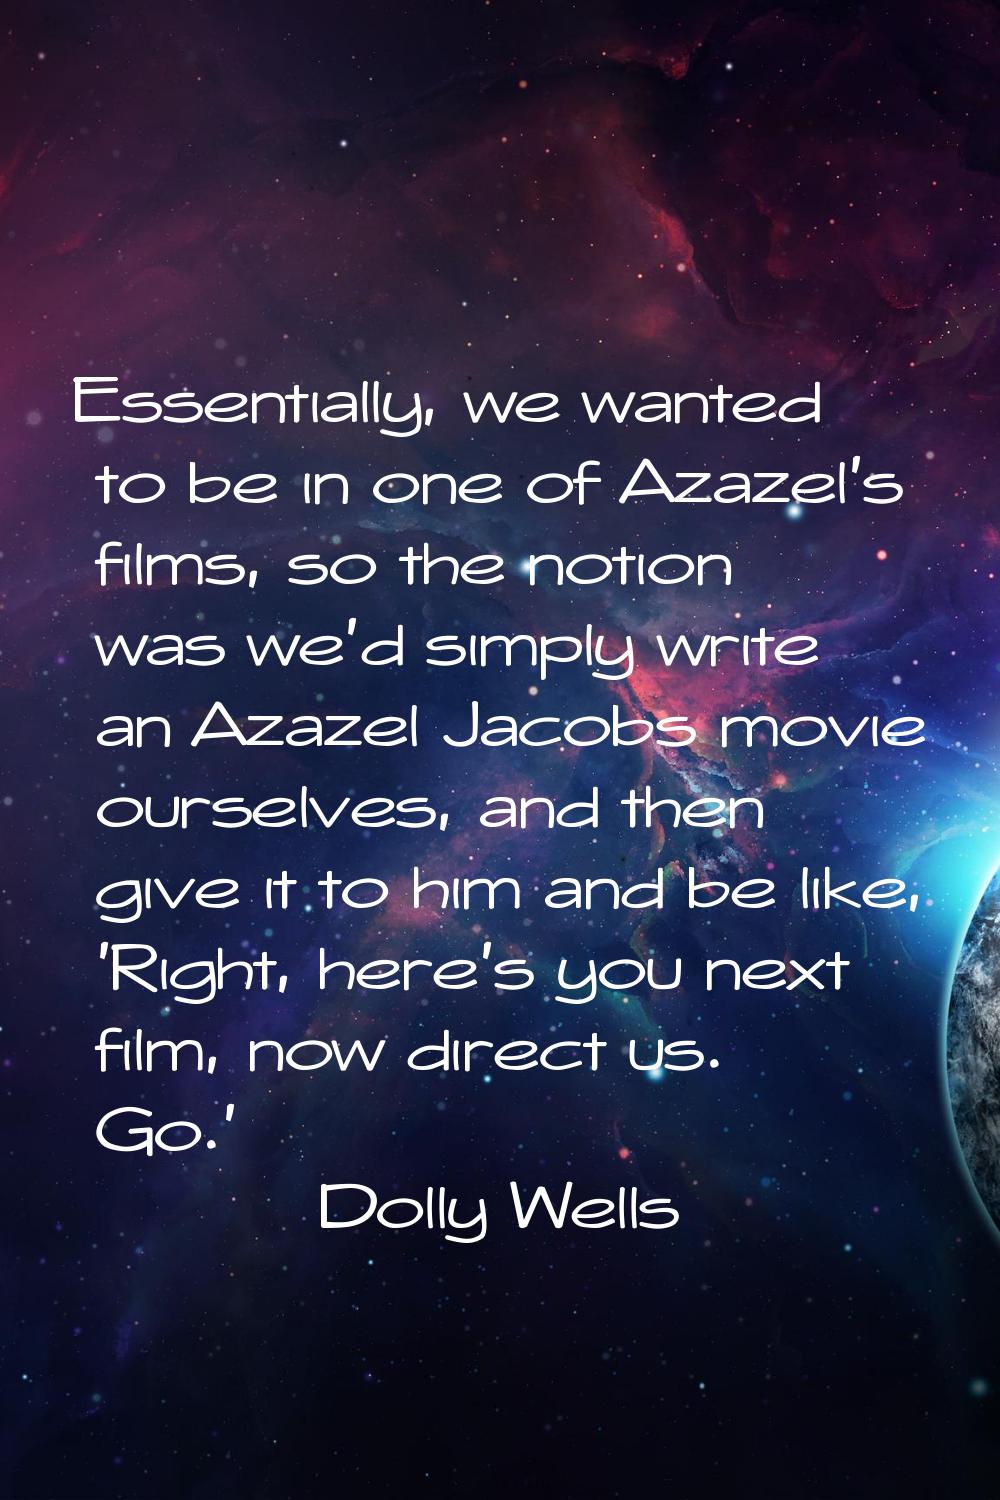 Essentially, we wanted to be in one of Azazel's films, so the notion was we'd simply write an Azaze